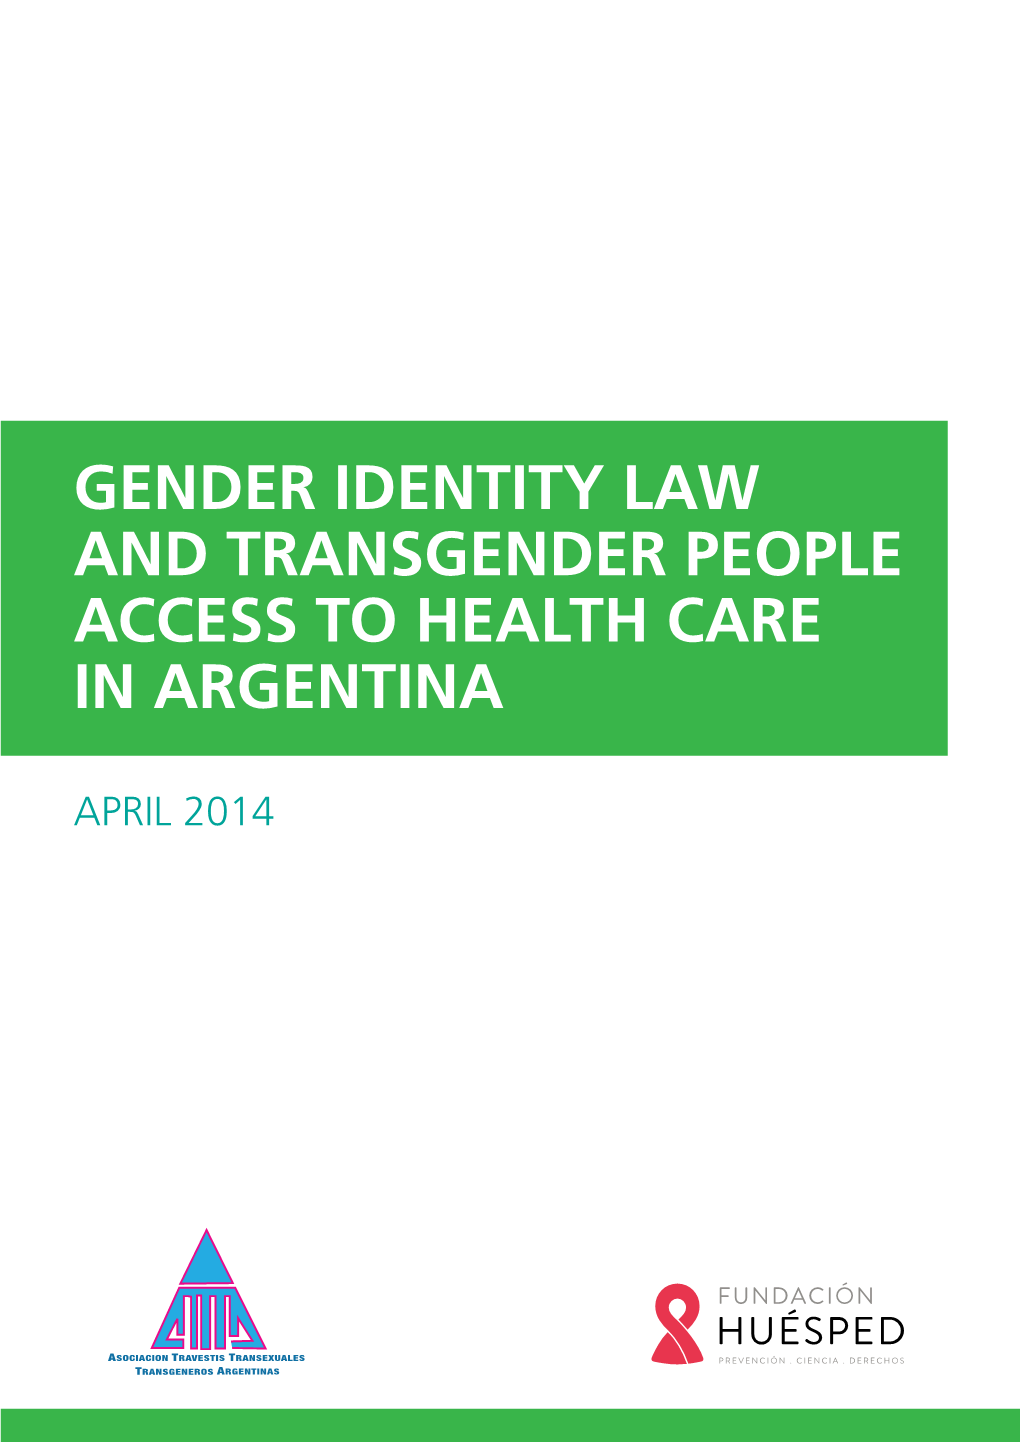 Gender Identity Law and Transgender People Access to Health Care in Argentina